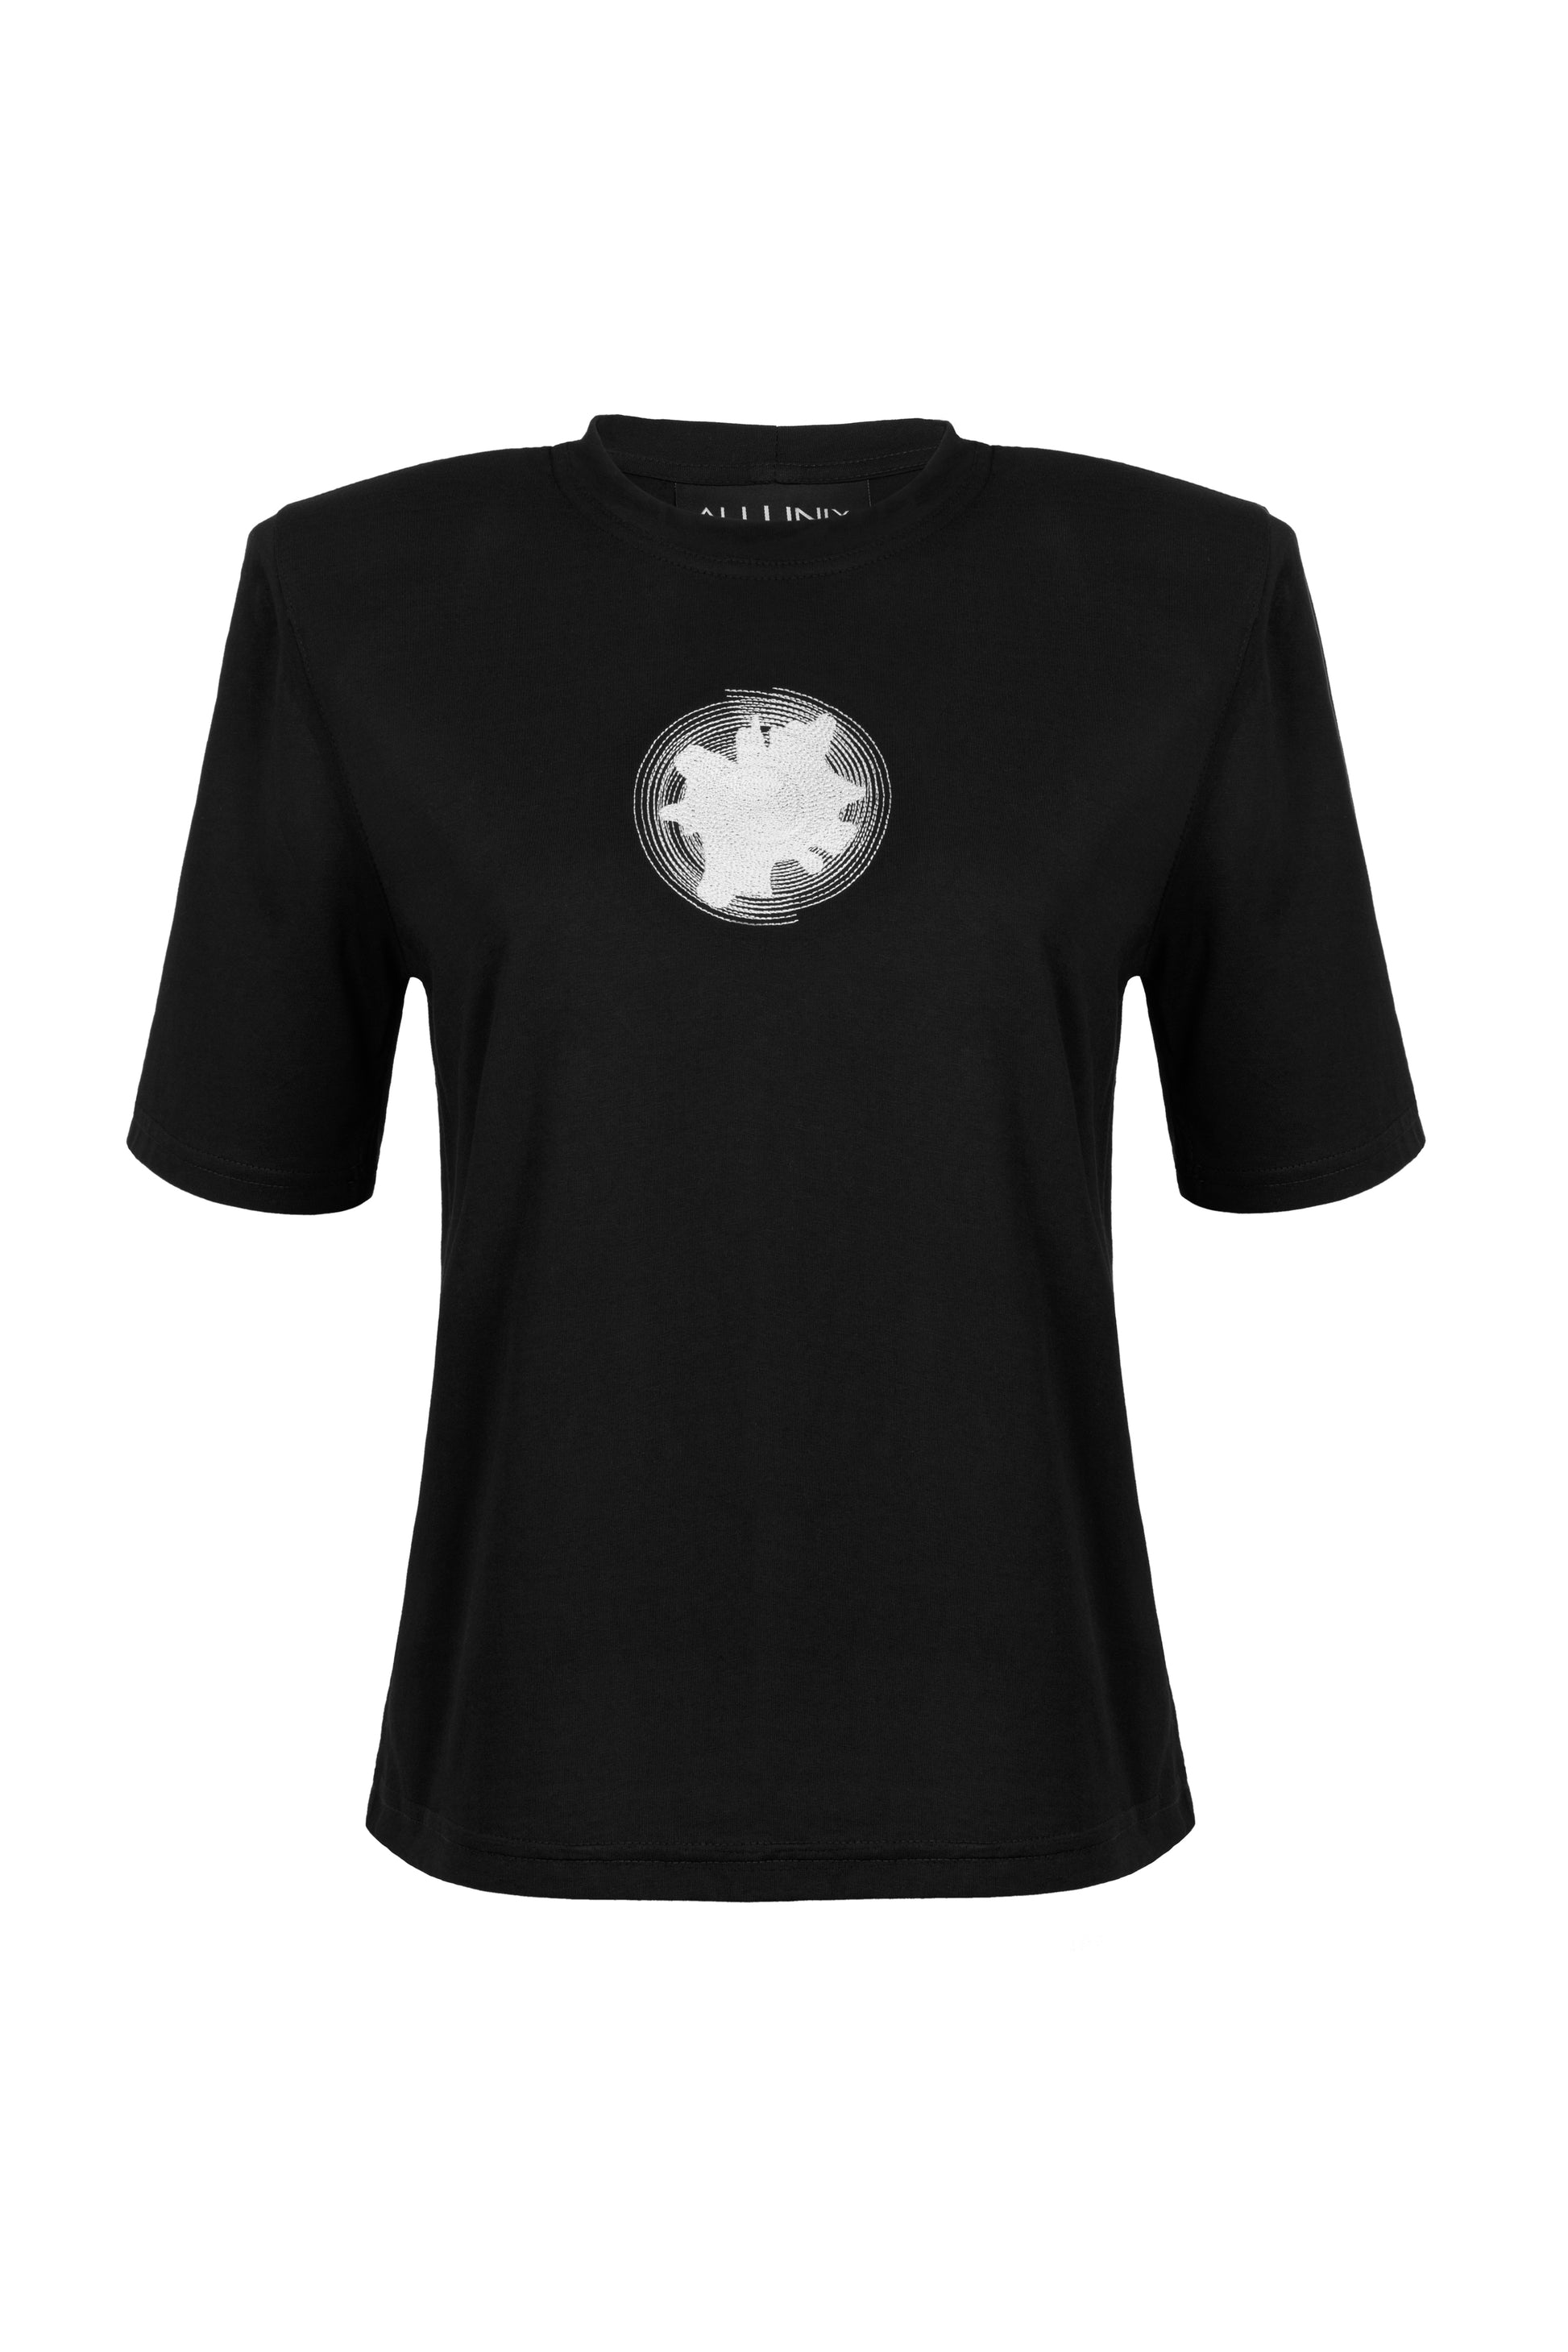 Black, oversized silhouette t-shirt with spiral embroidery in white. The embroidery is in the upper frontal centre of the t-shirt. The fabric is from 100% eco-friendly cotton. It's photographed from the front on white background.